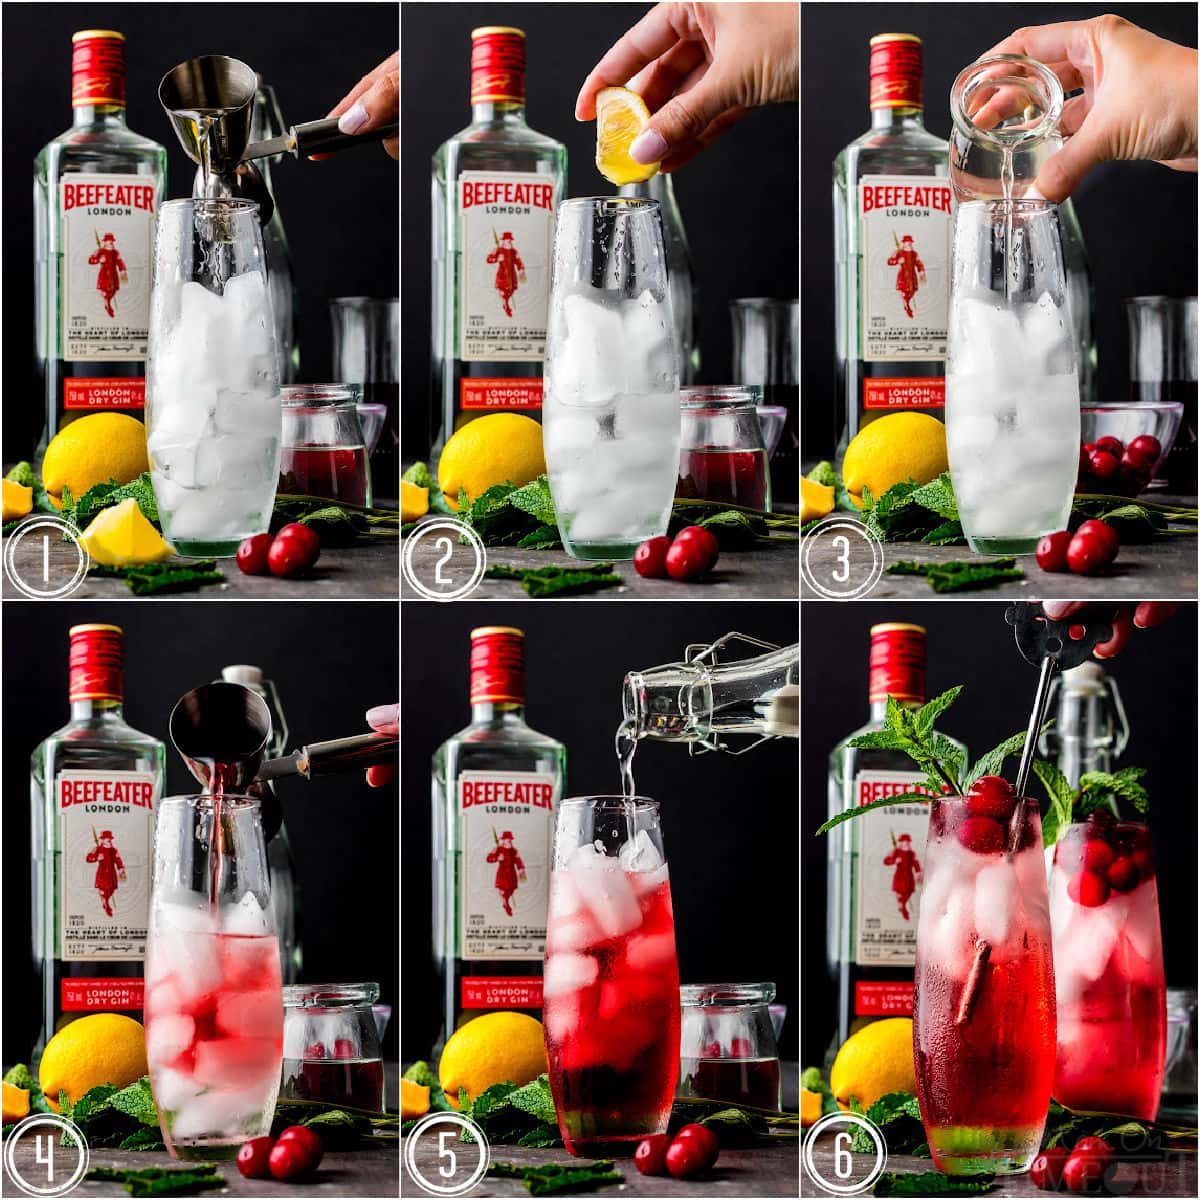 six image collage showing how to make a cranberry gin cocktail step by step.